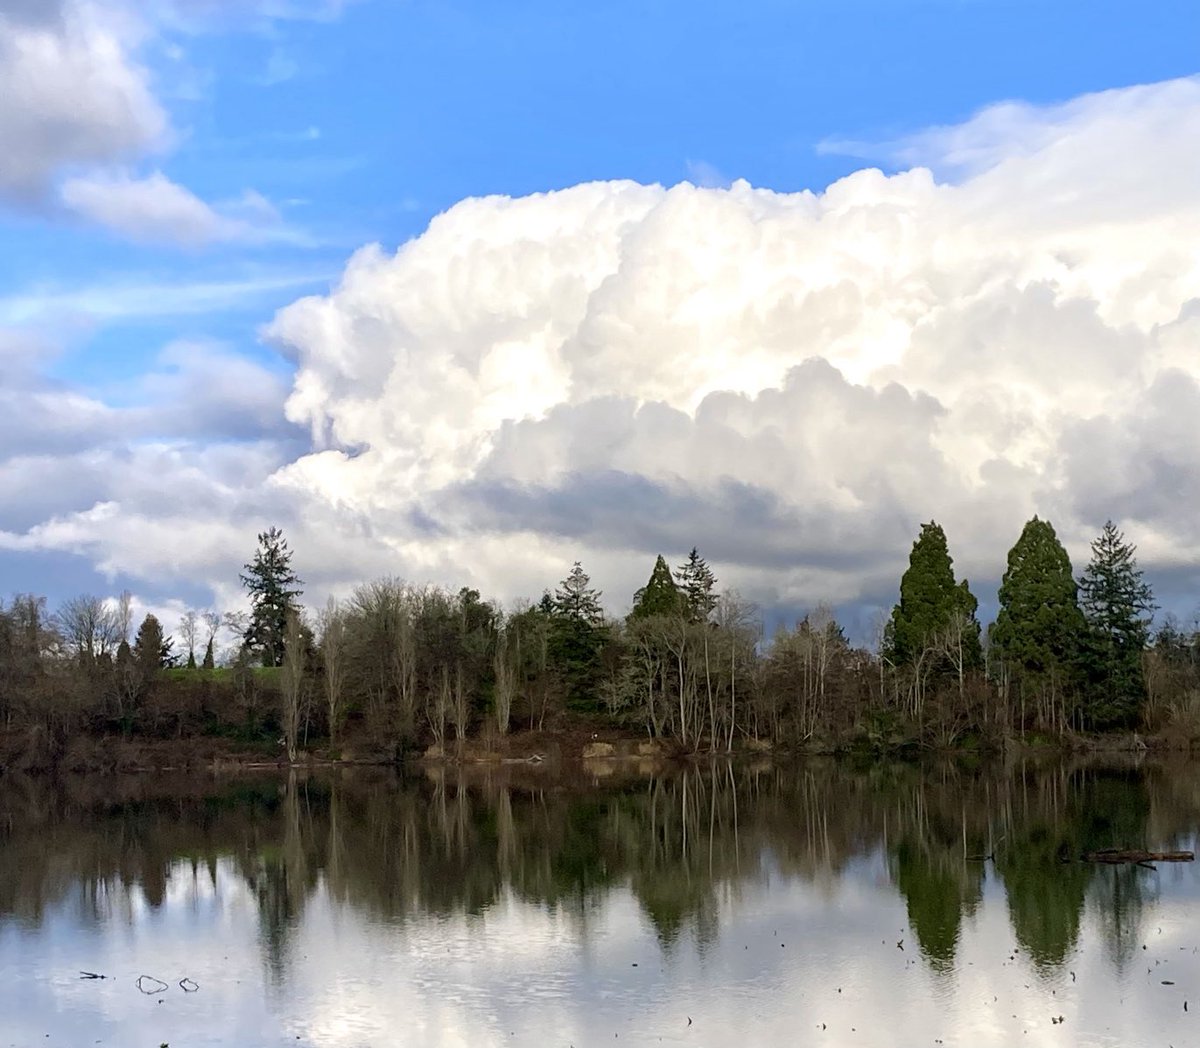 Happy #EarthDay! Show me one of your favorite places on Earth. This is Waughop Lake in #Lakewood, which I walk around a few times a week. #pnw #walking #getoutside